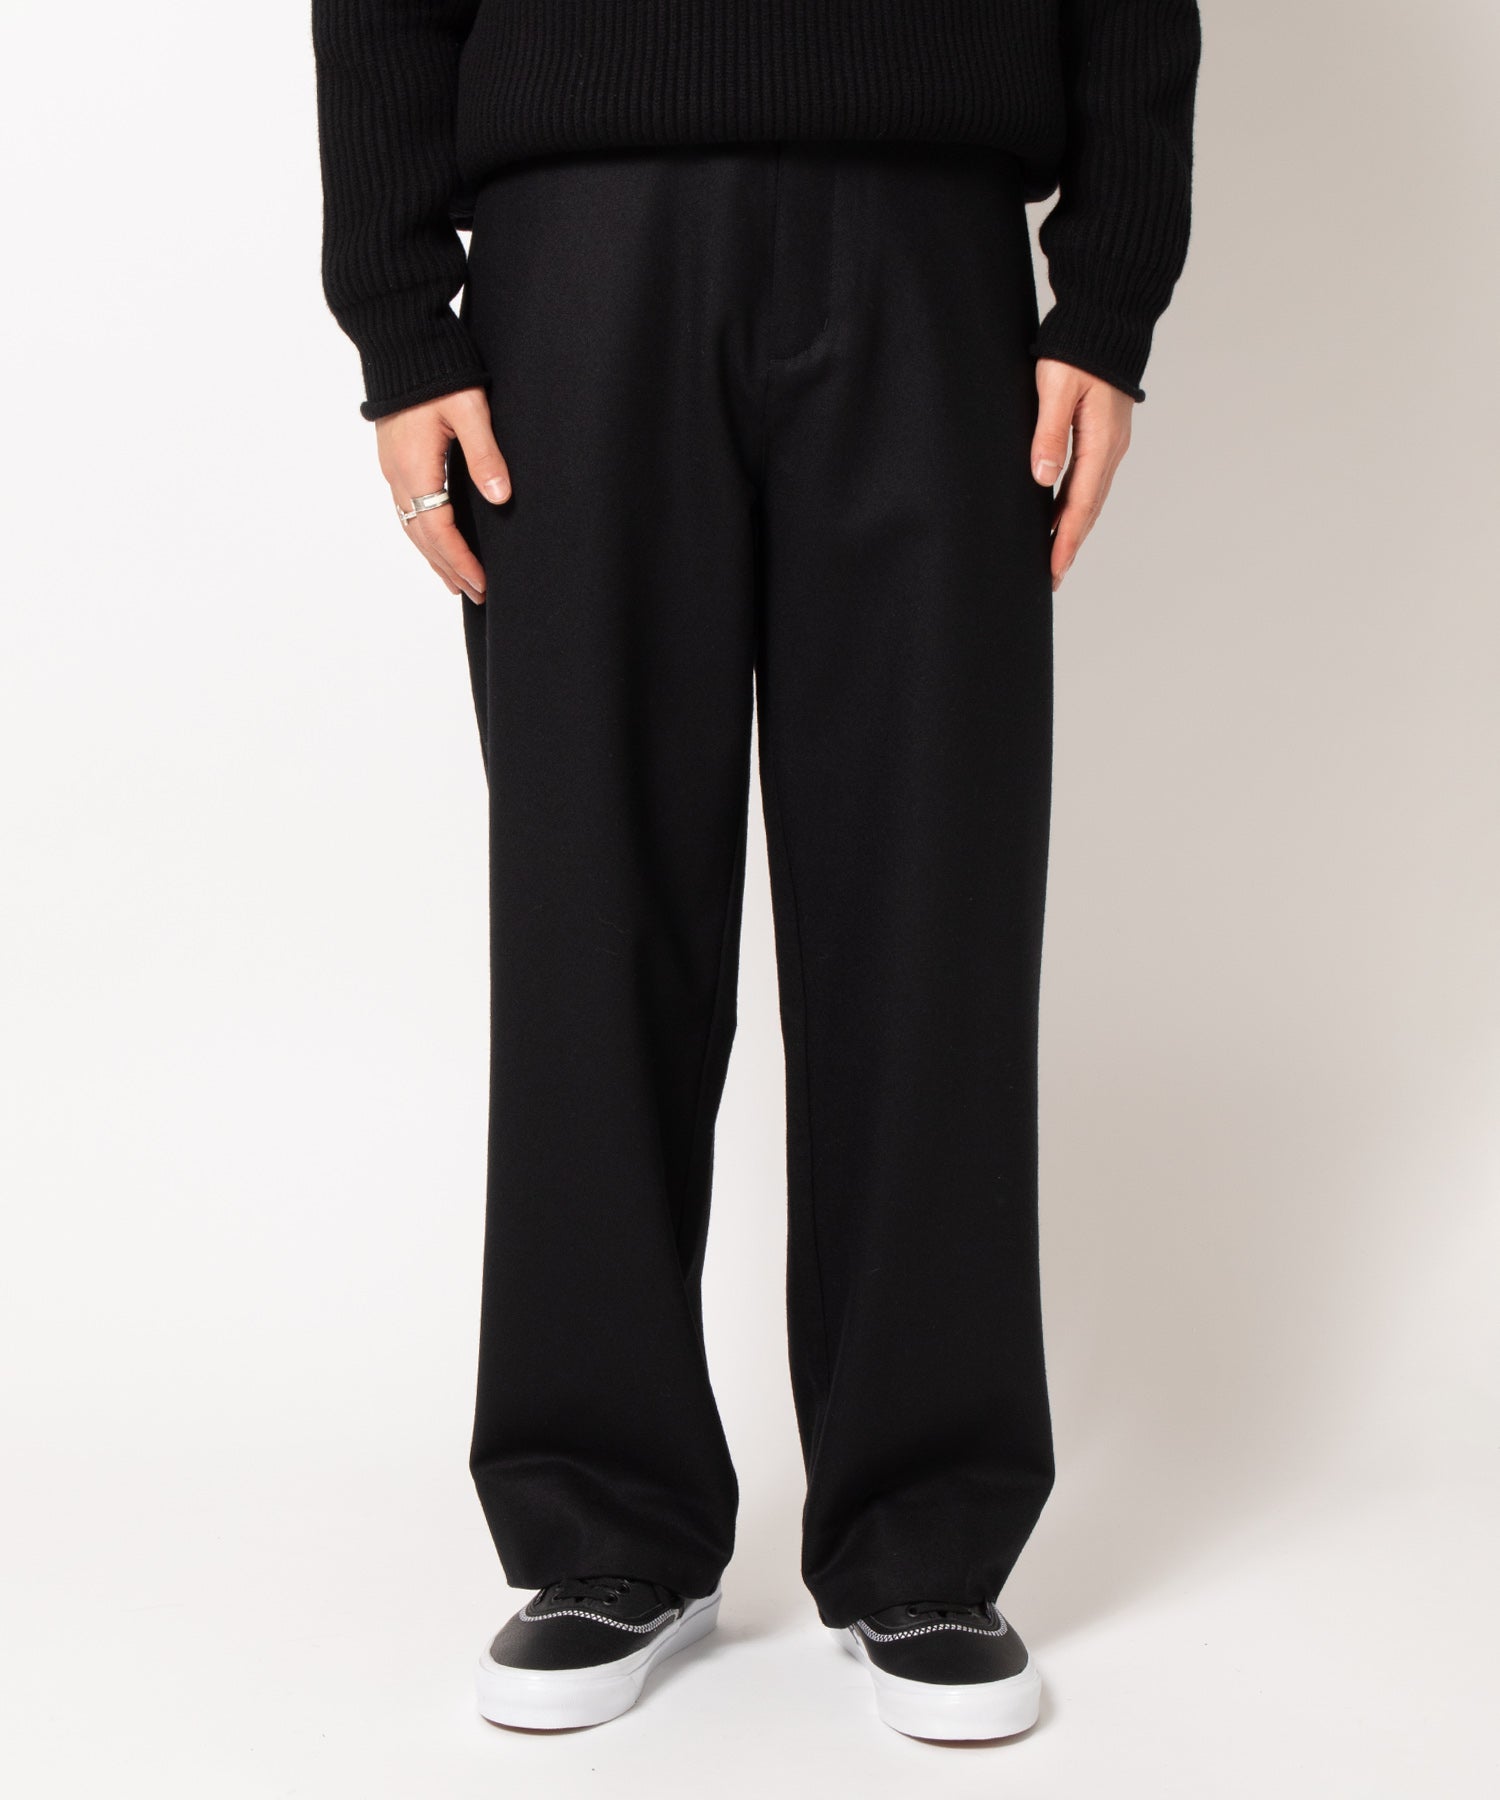 Double Loop Trousers Flannel - Eddie Bauer Black Tag Collection 